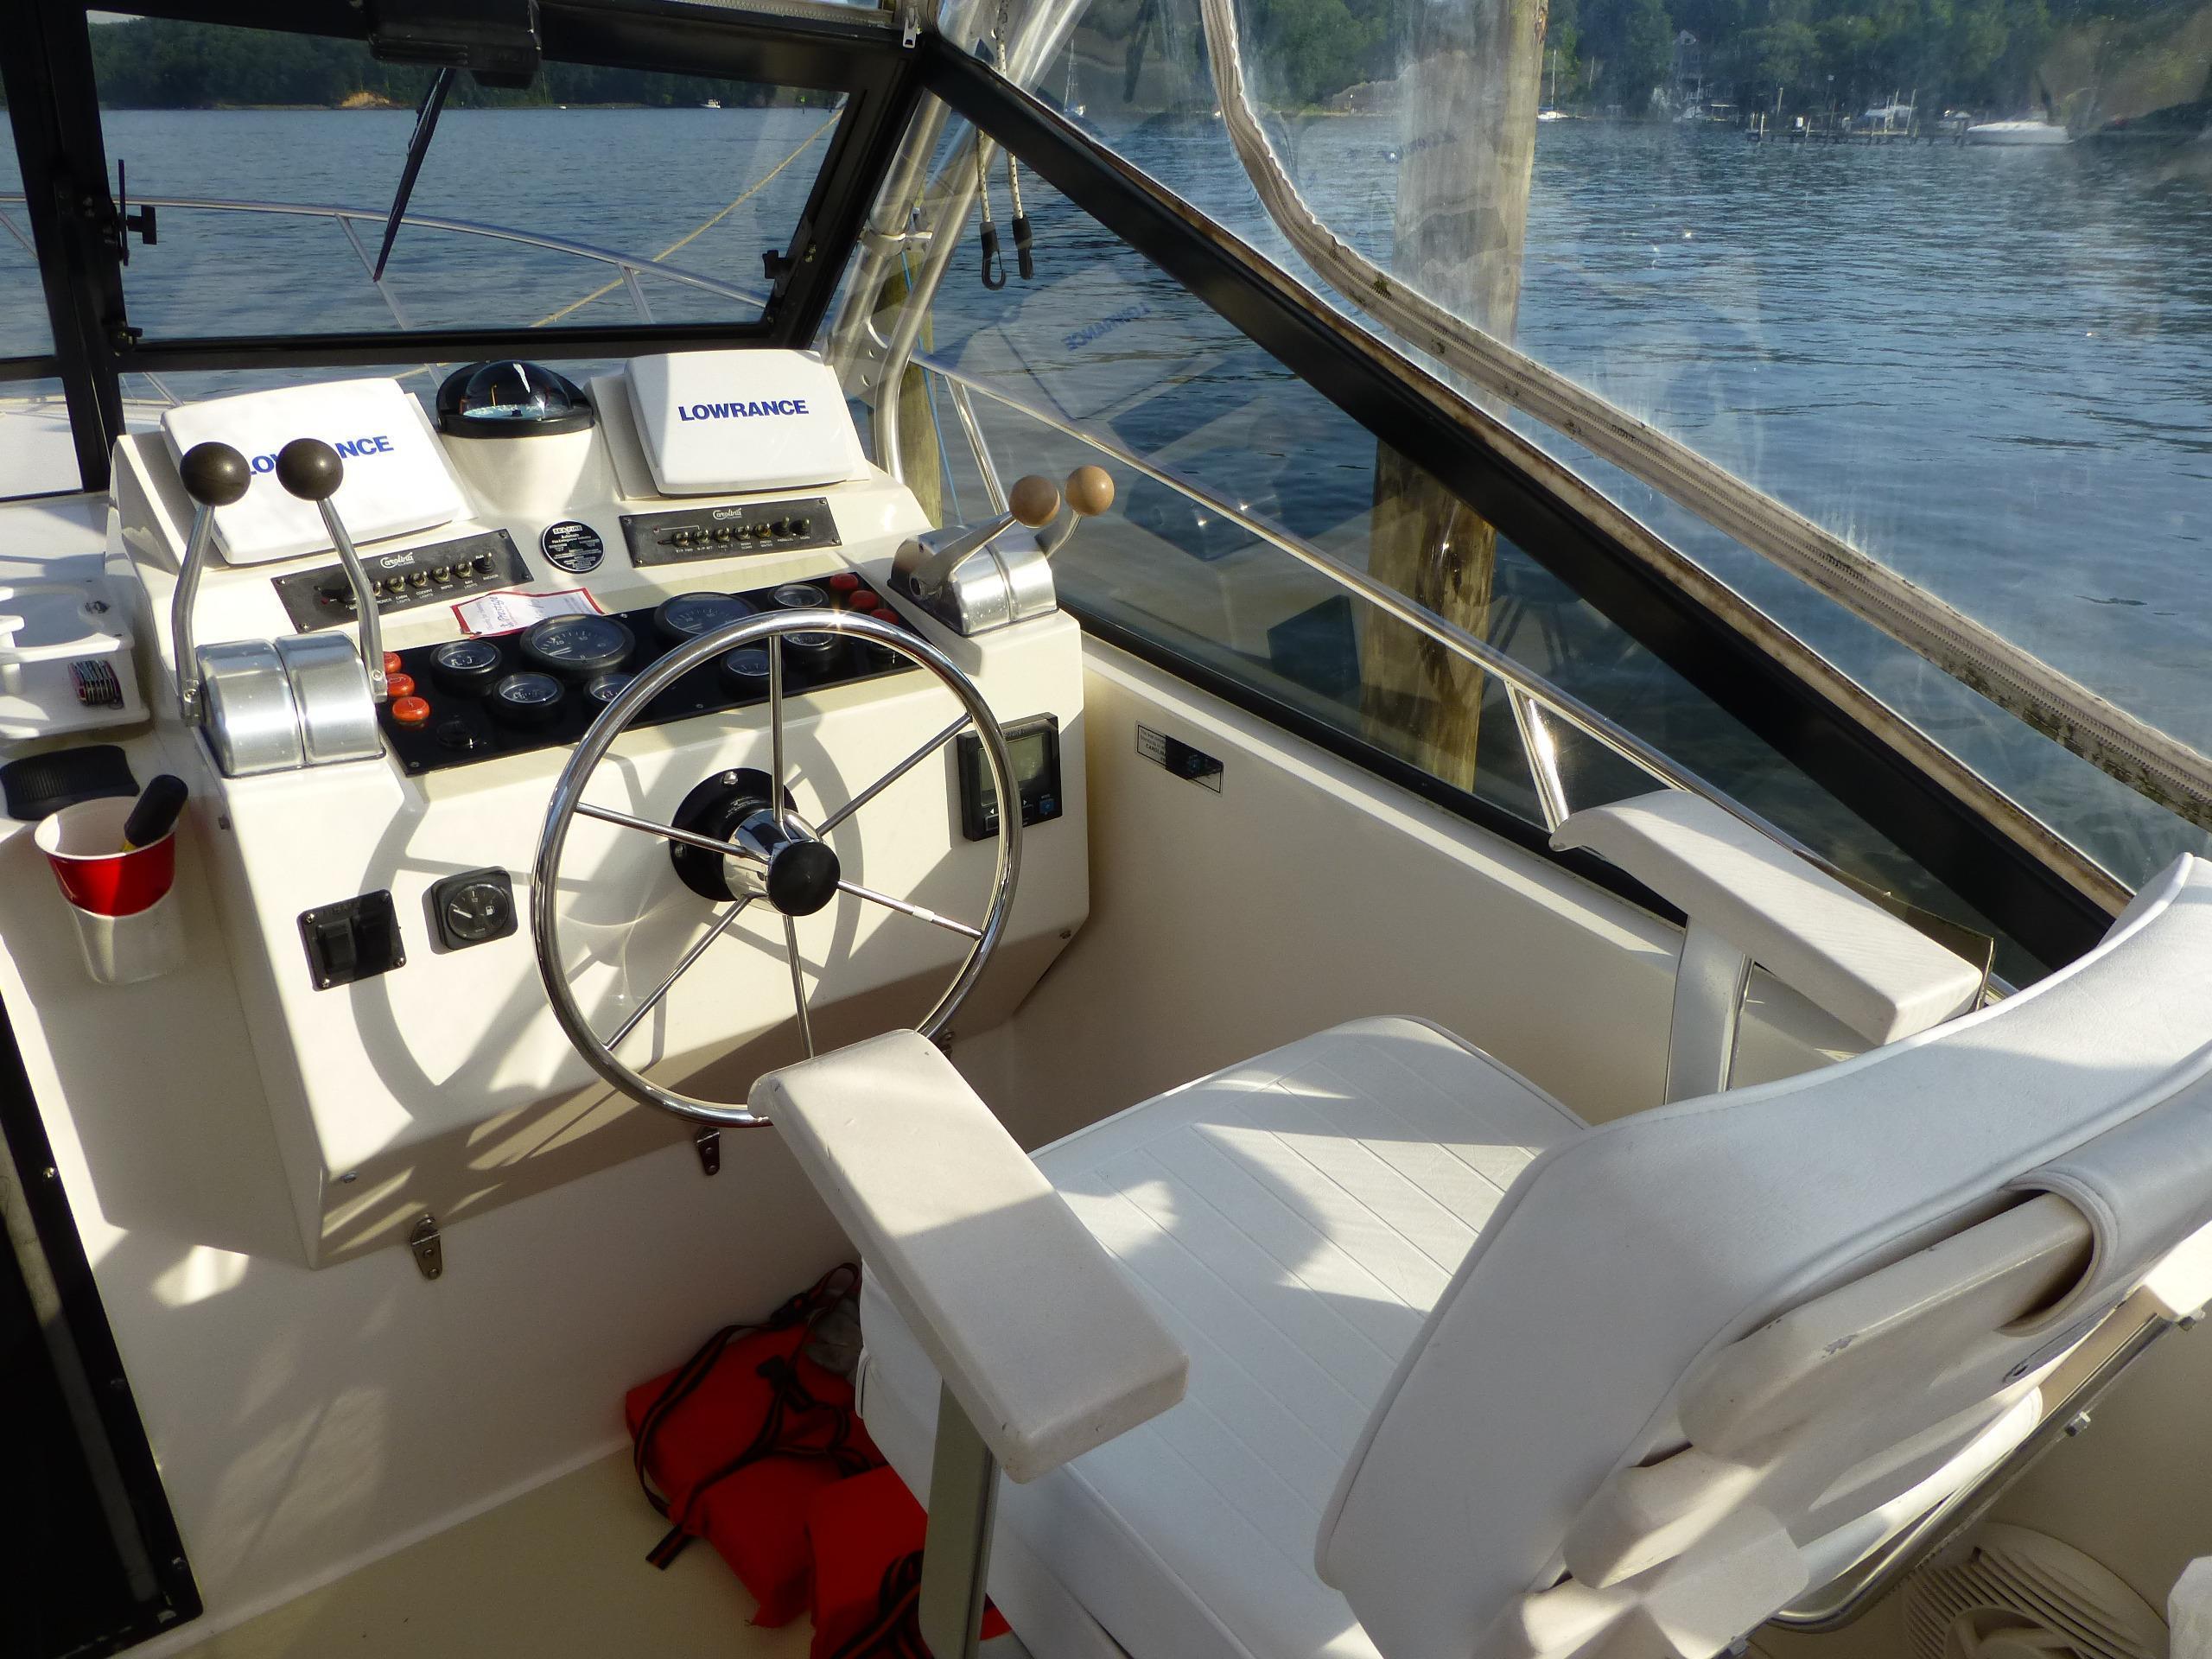 Carolina Classic 28 SF, On Land @ Smith's Marina in Crownsville/Annapolis